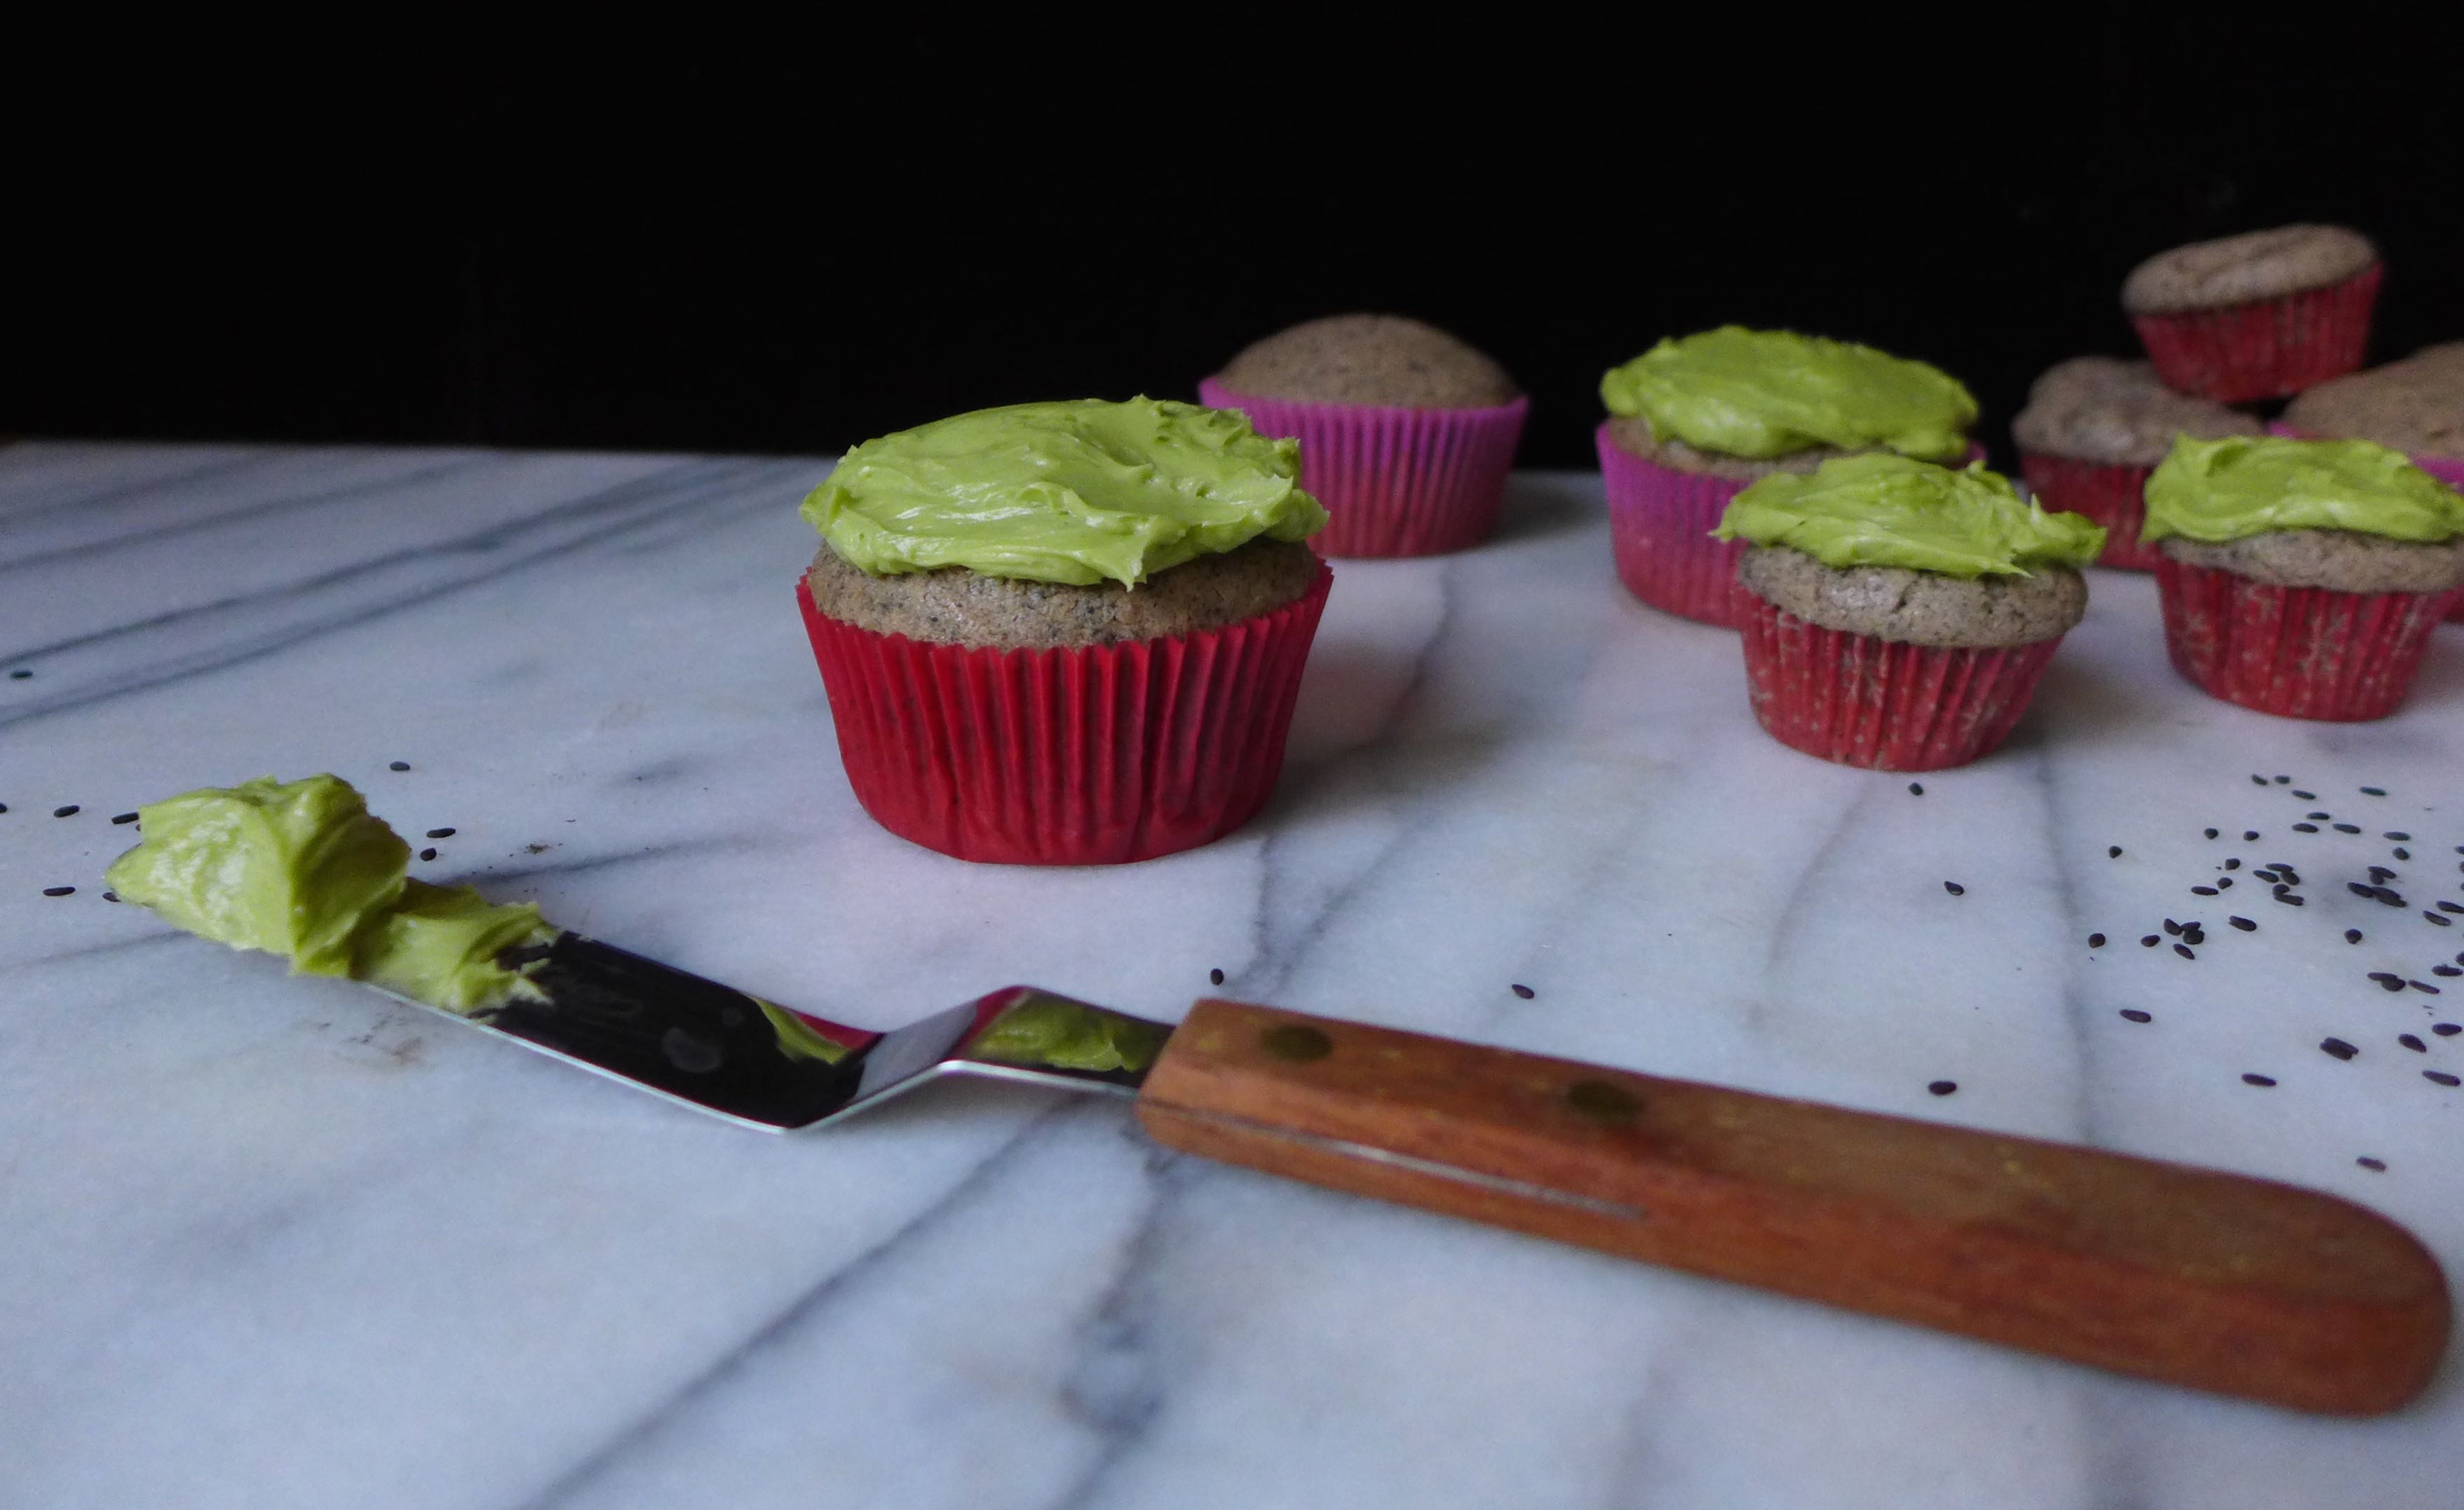 Black Sesame Cupcakes with Matcha Frosting